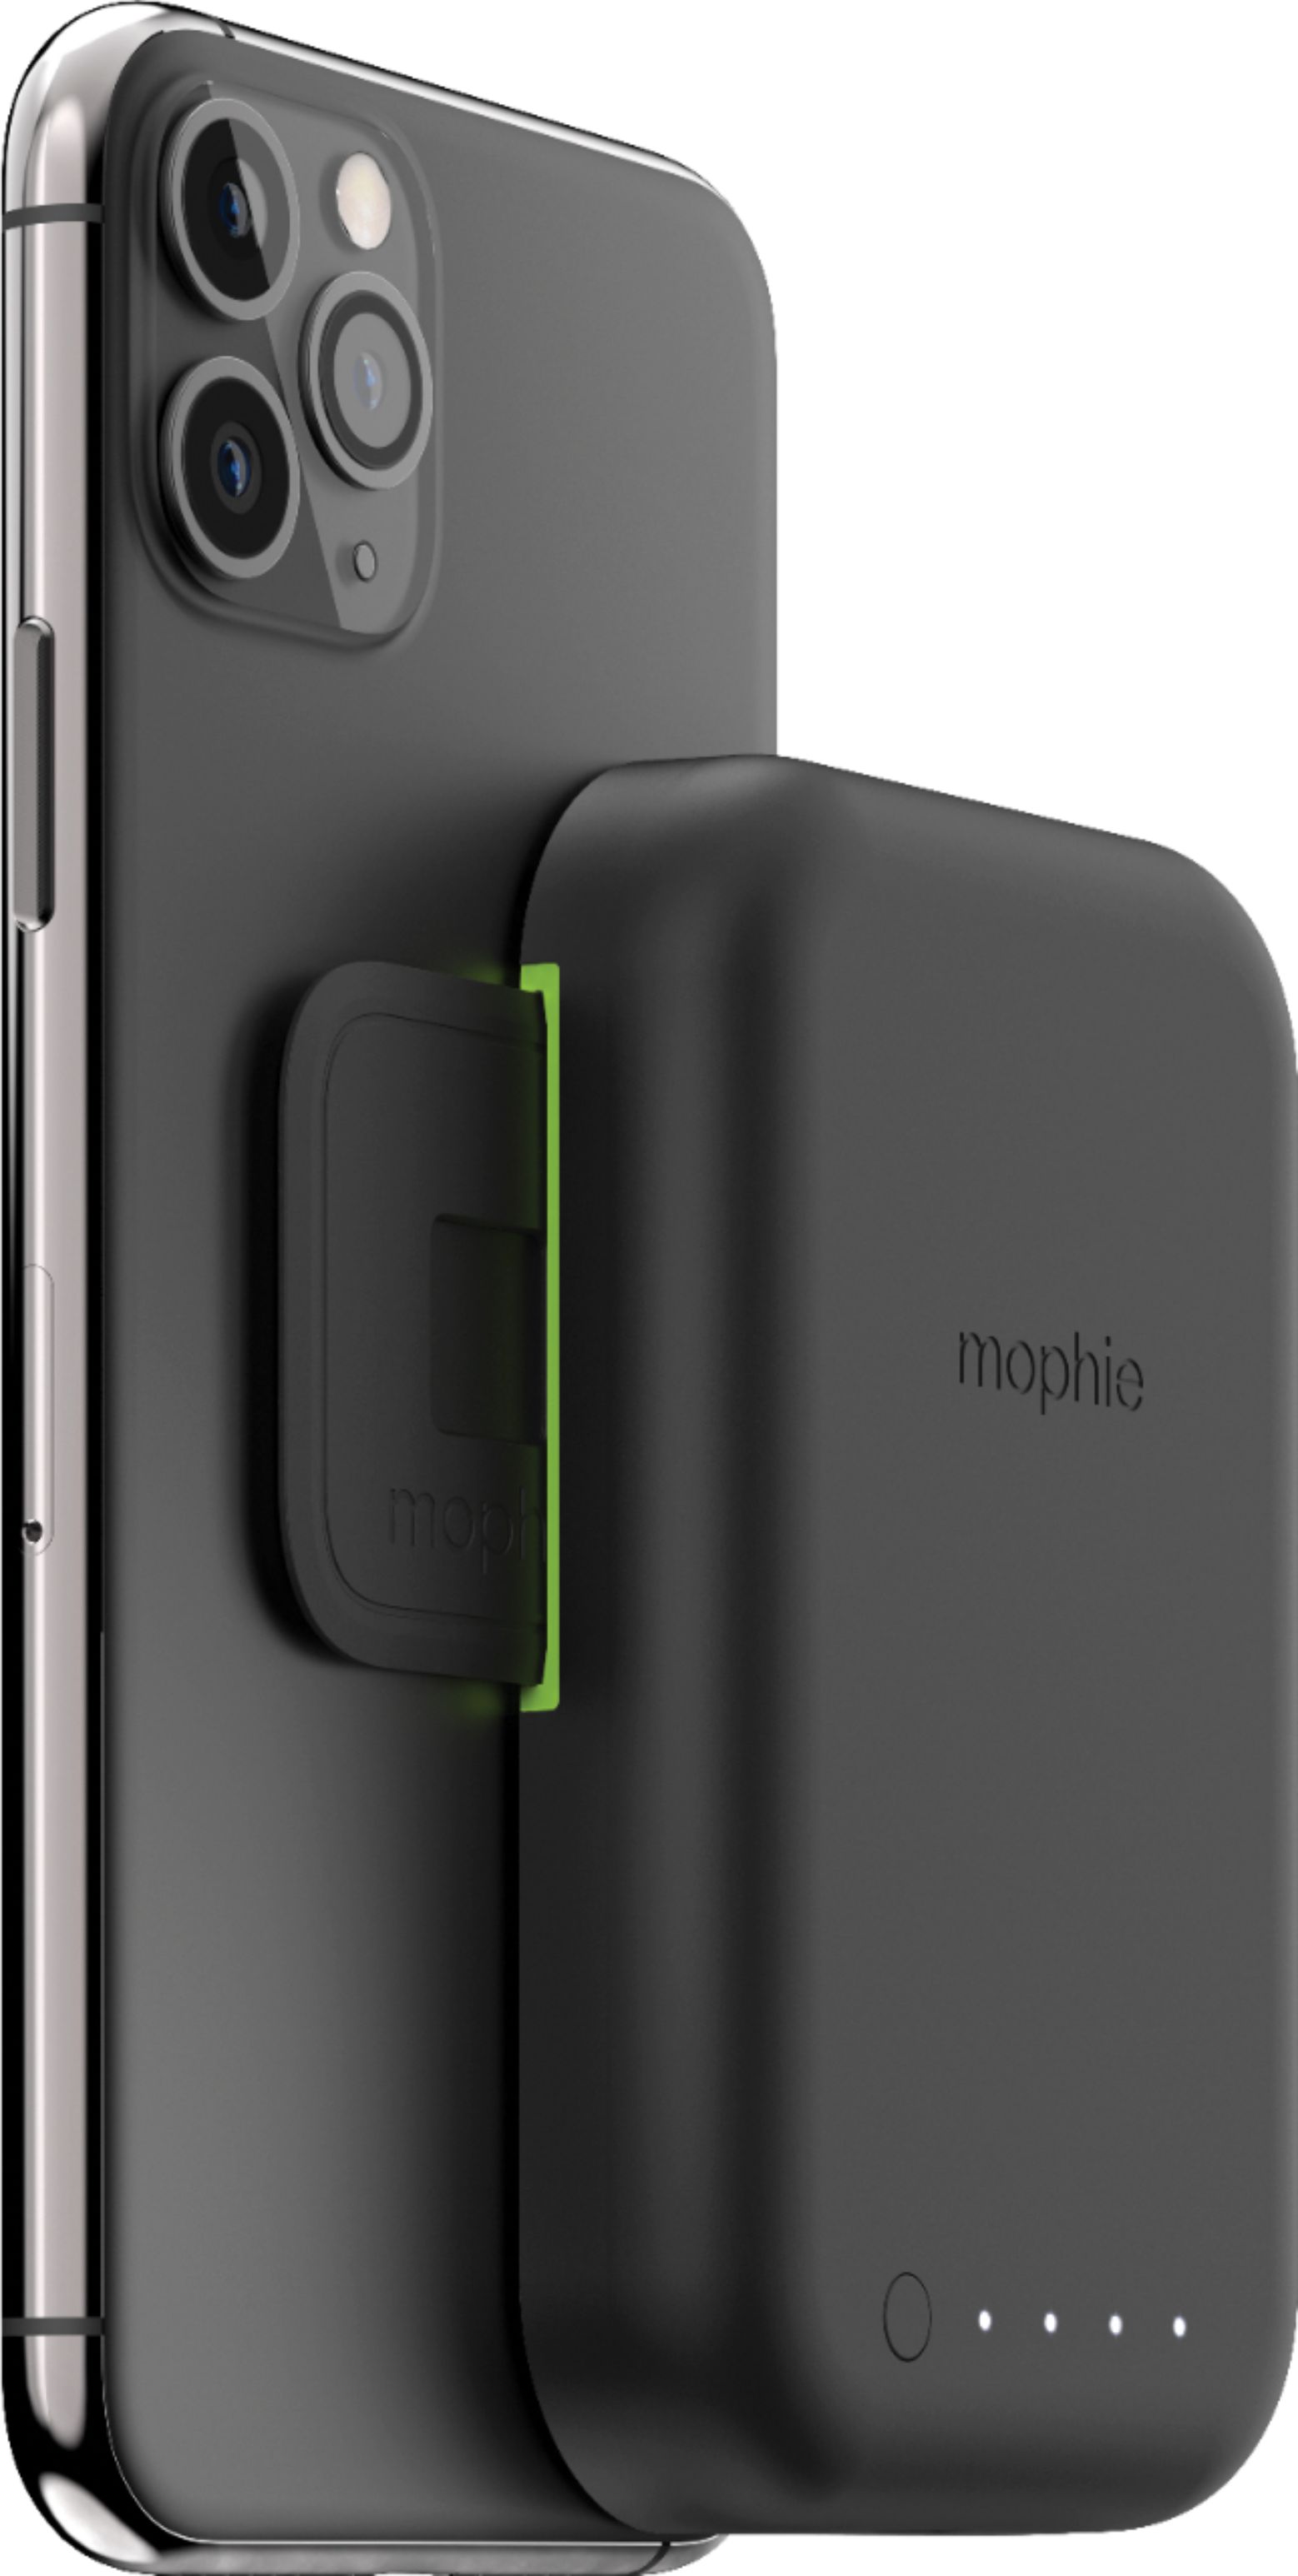 Angle View: mophie - Powerstation Go Wireless Portable Car Jump Starter with AC Outlet and Wireless Charging - Onyx